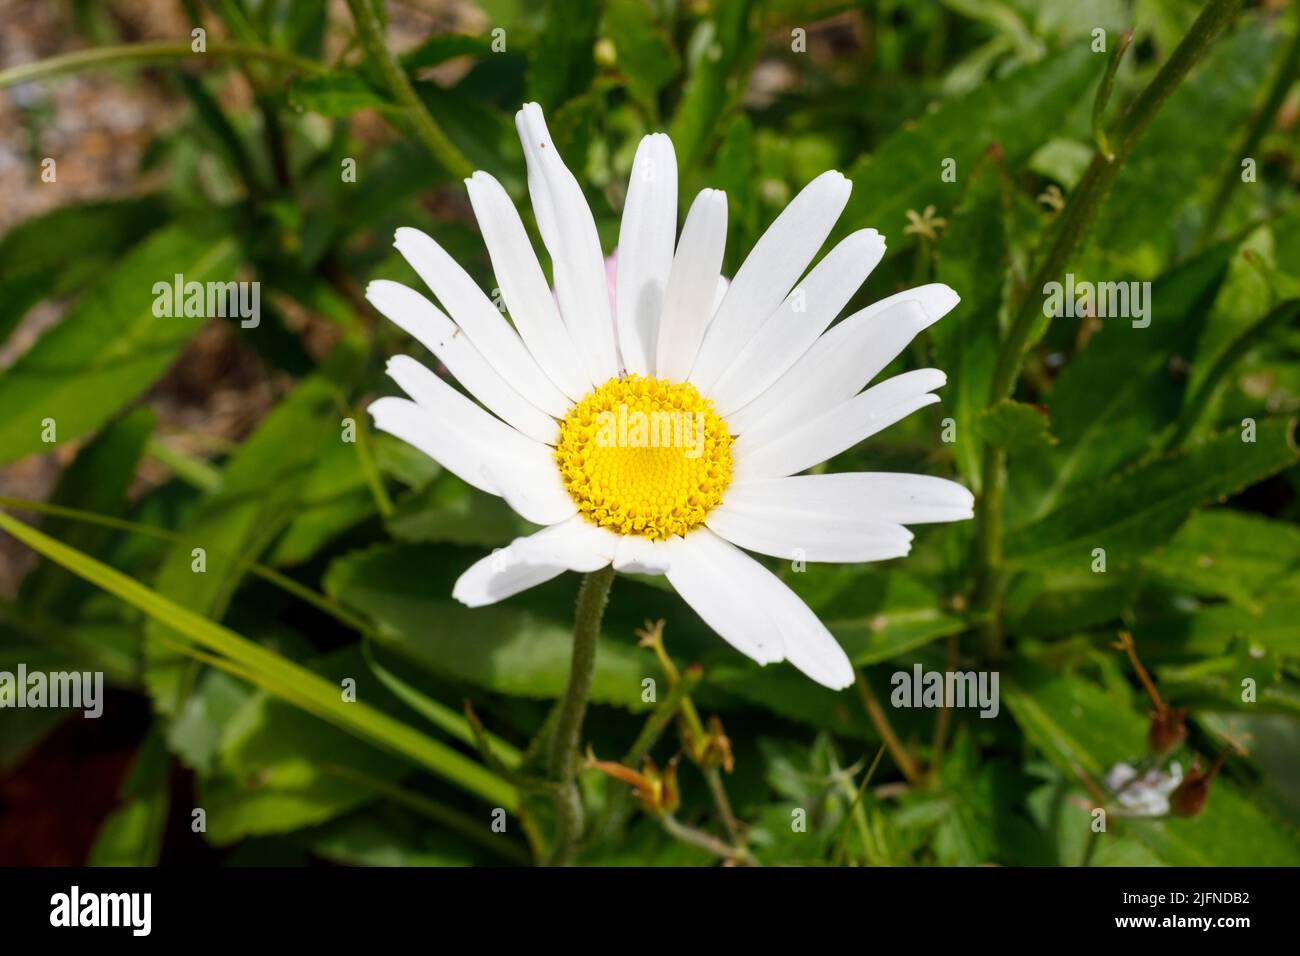 White Daisies in an English country garden during the summer Stock Photo